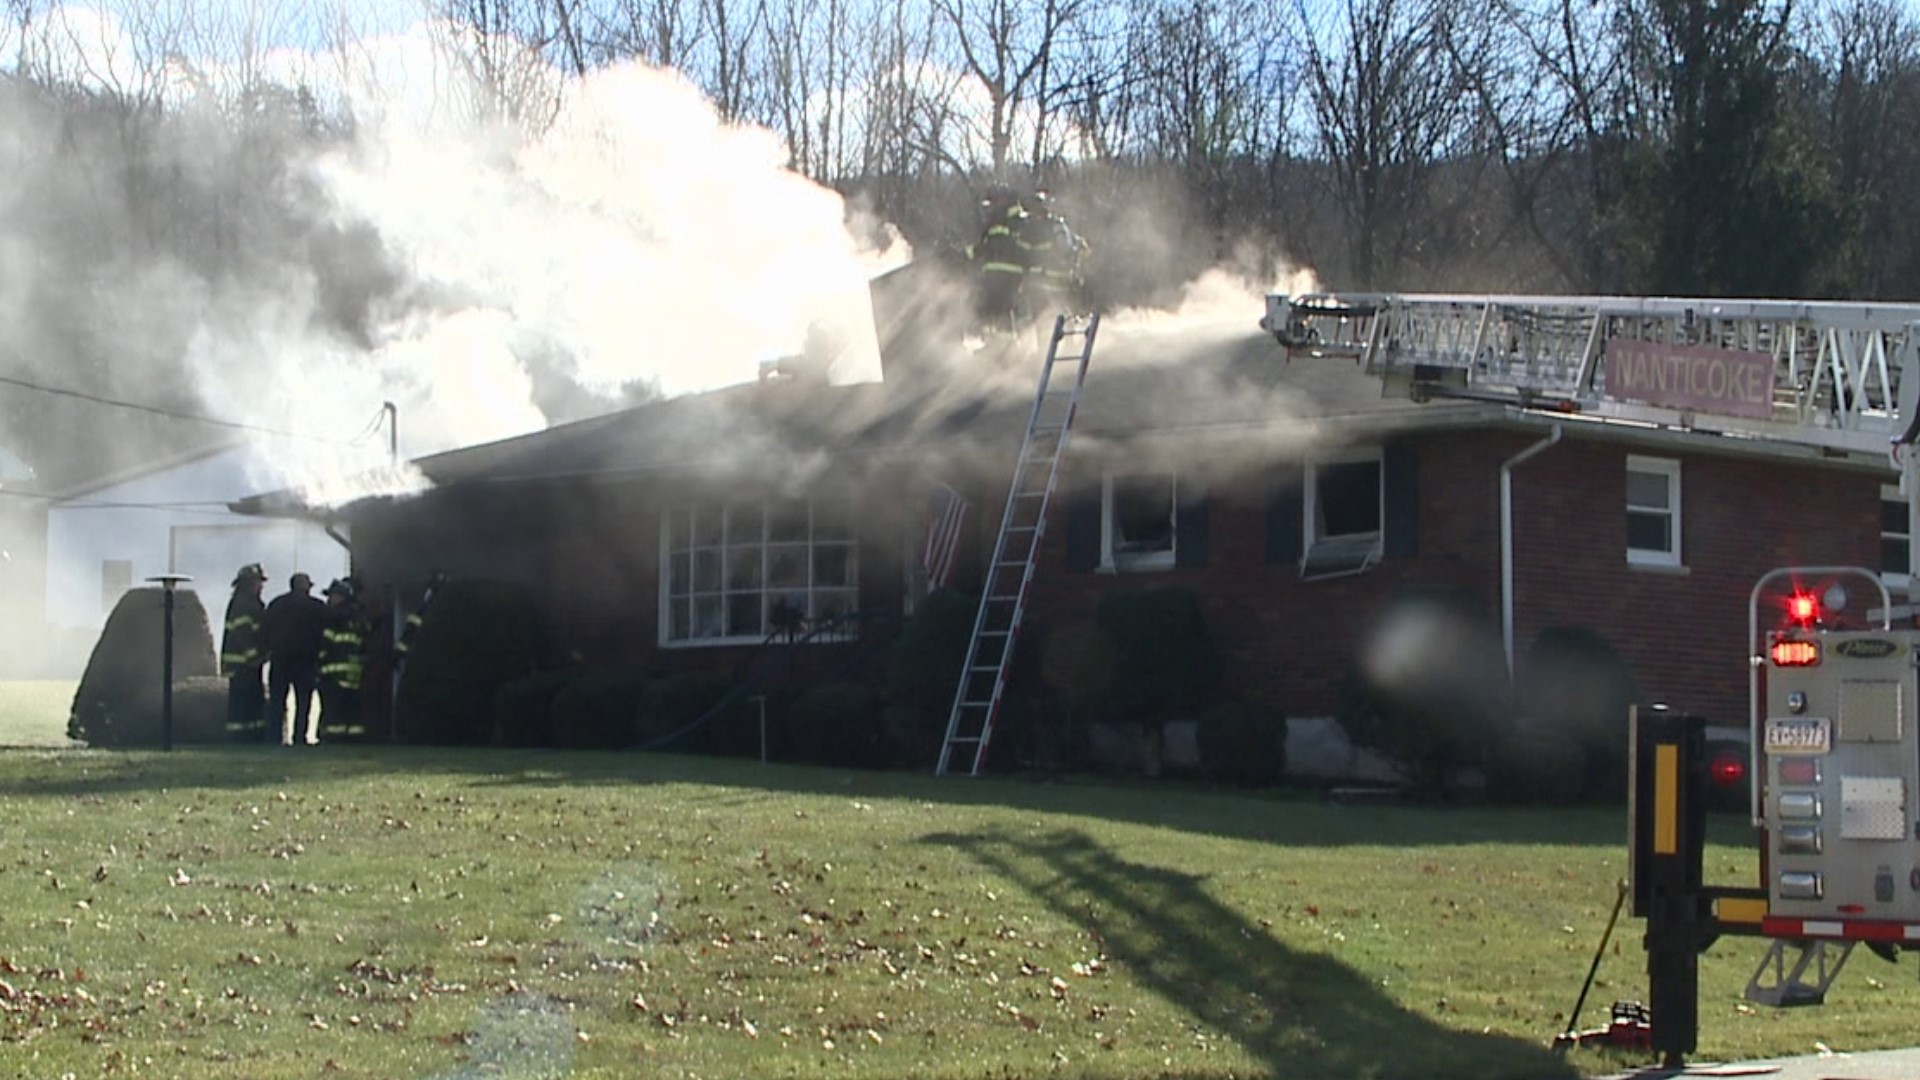 The fire started around 11:25 a.m. Sunday morning in Newport Township.